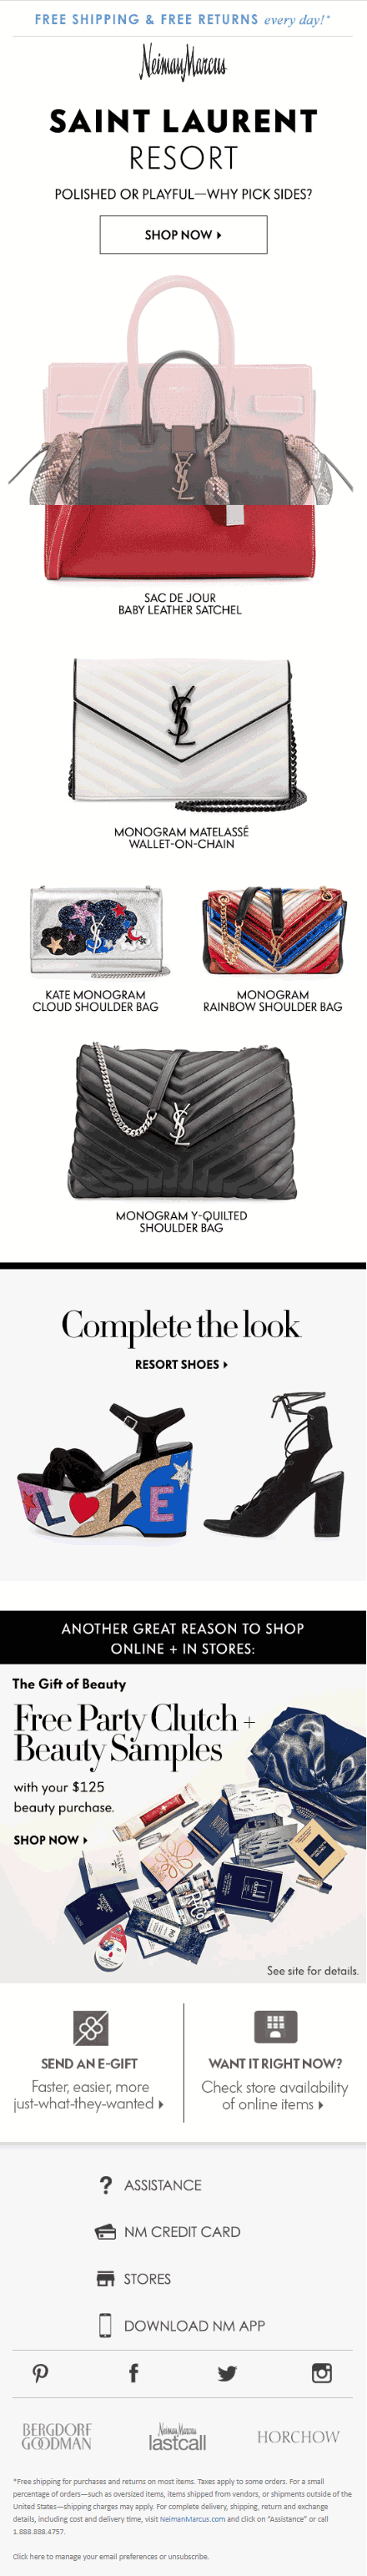 Email Landing Page_Neiman Marcus